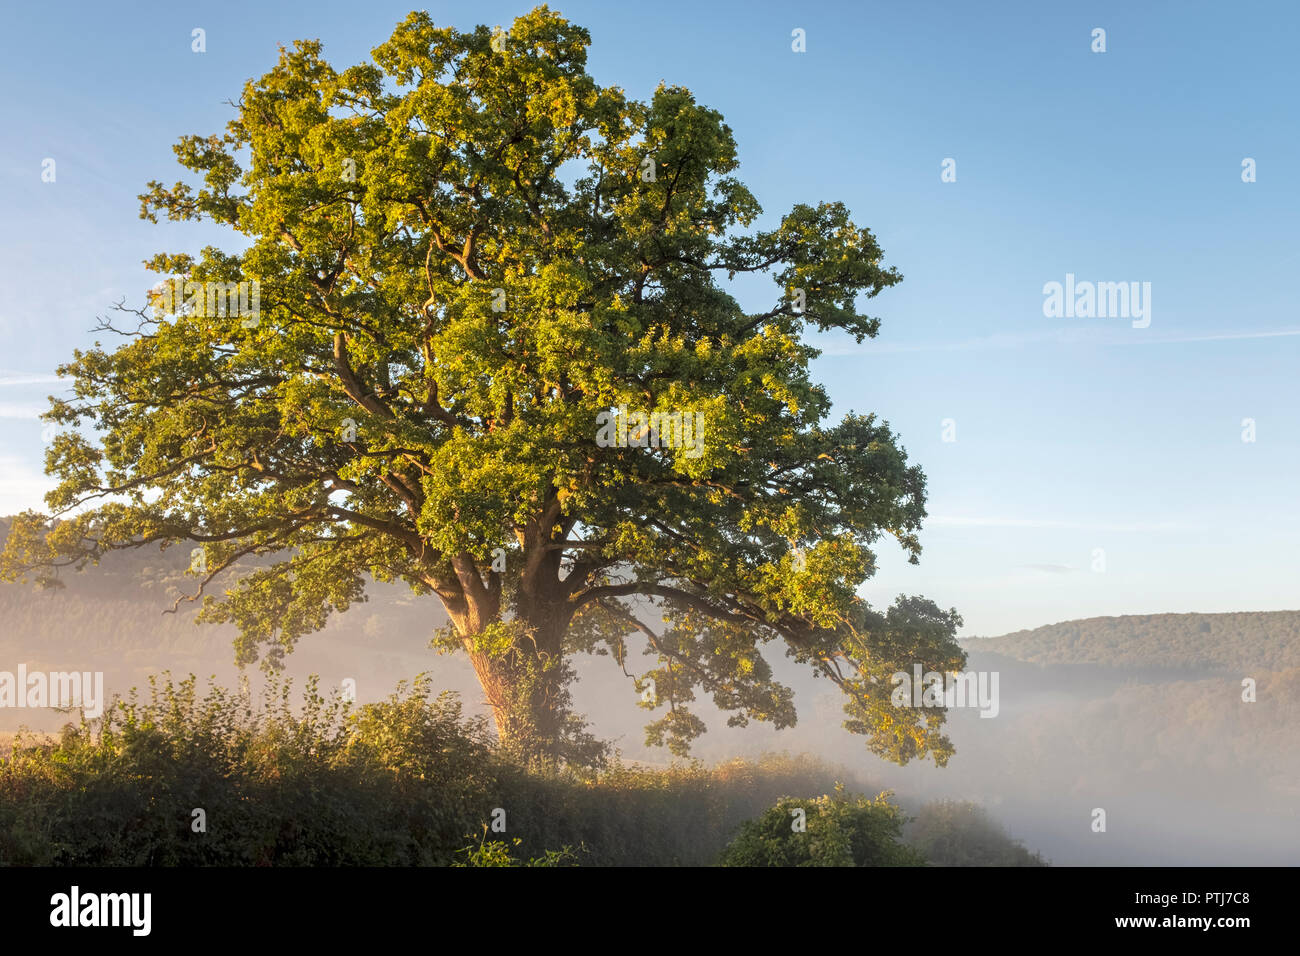 Oak tree bathed in sunshine and surrounded by morning mist in the Wye valley at Bigsweir. Stock Photo